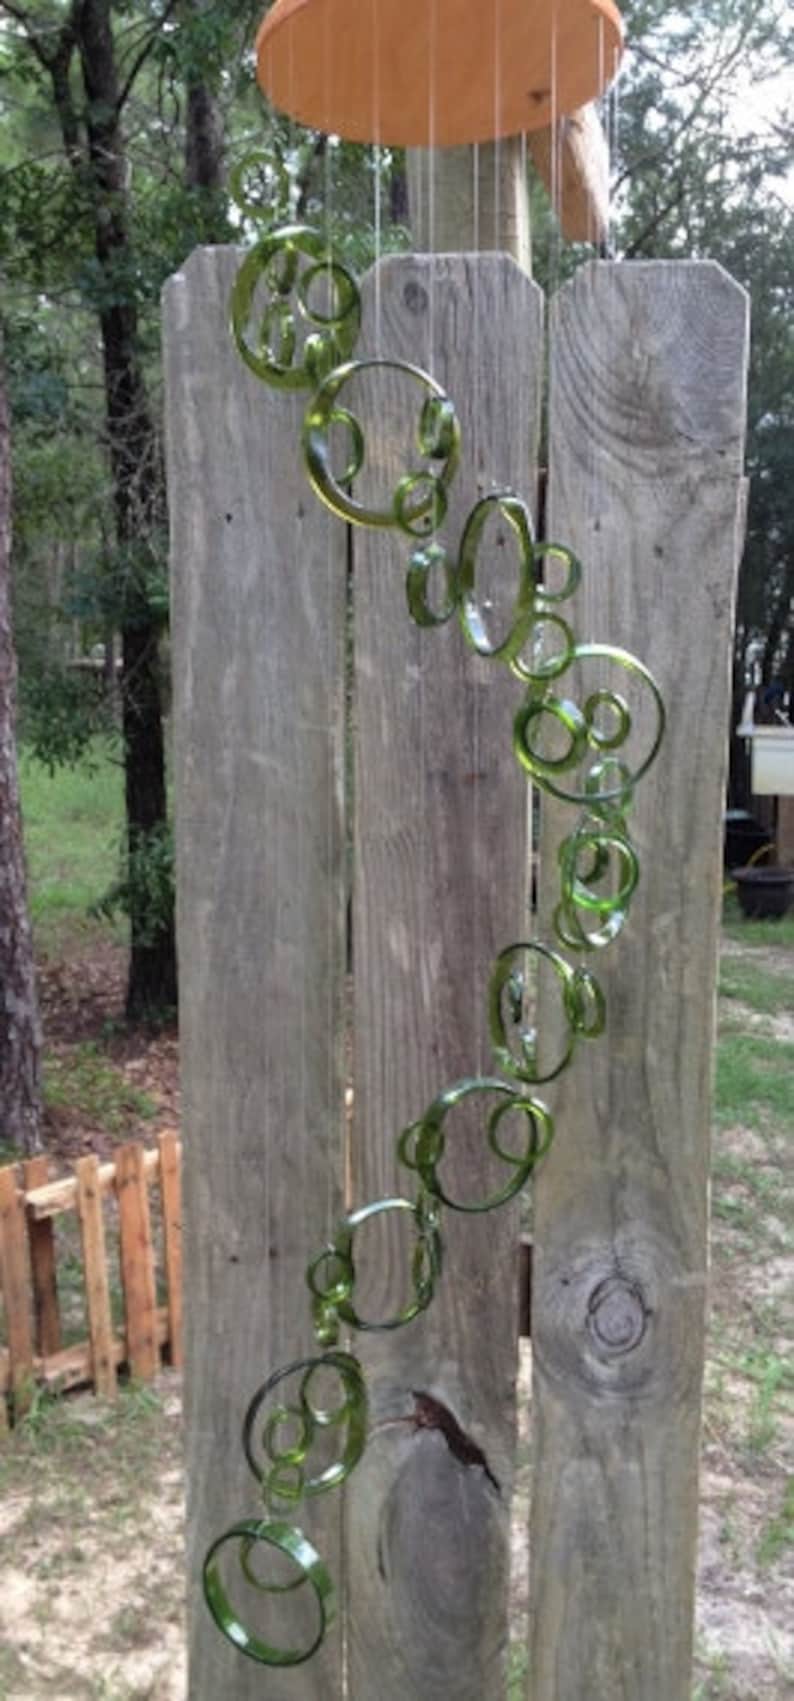 All Green GLASS WINDCHIMES-RECYCLED Wine Bottles Out door Yard Art Garden Patio Decoration Unique Gifts Home Decor Mobiles image 1